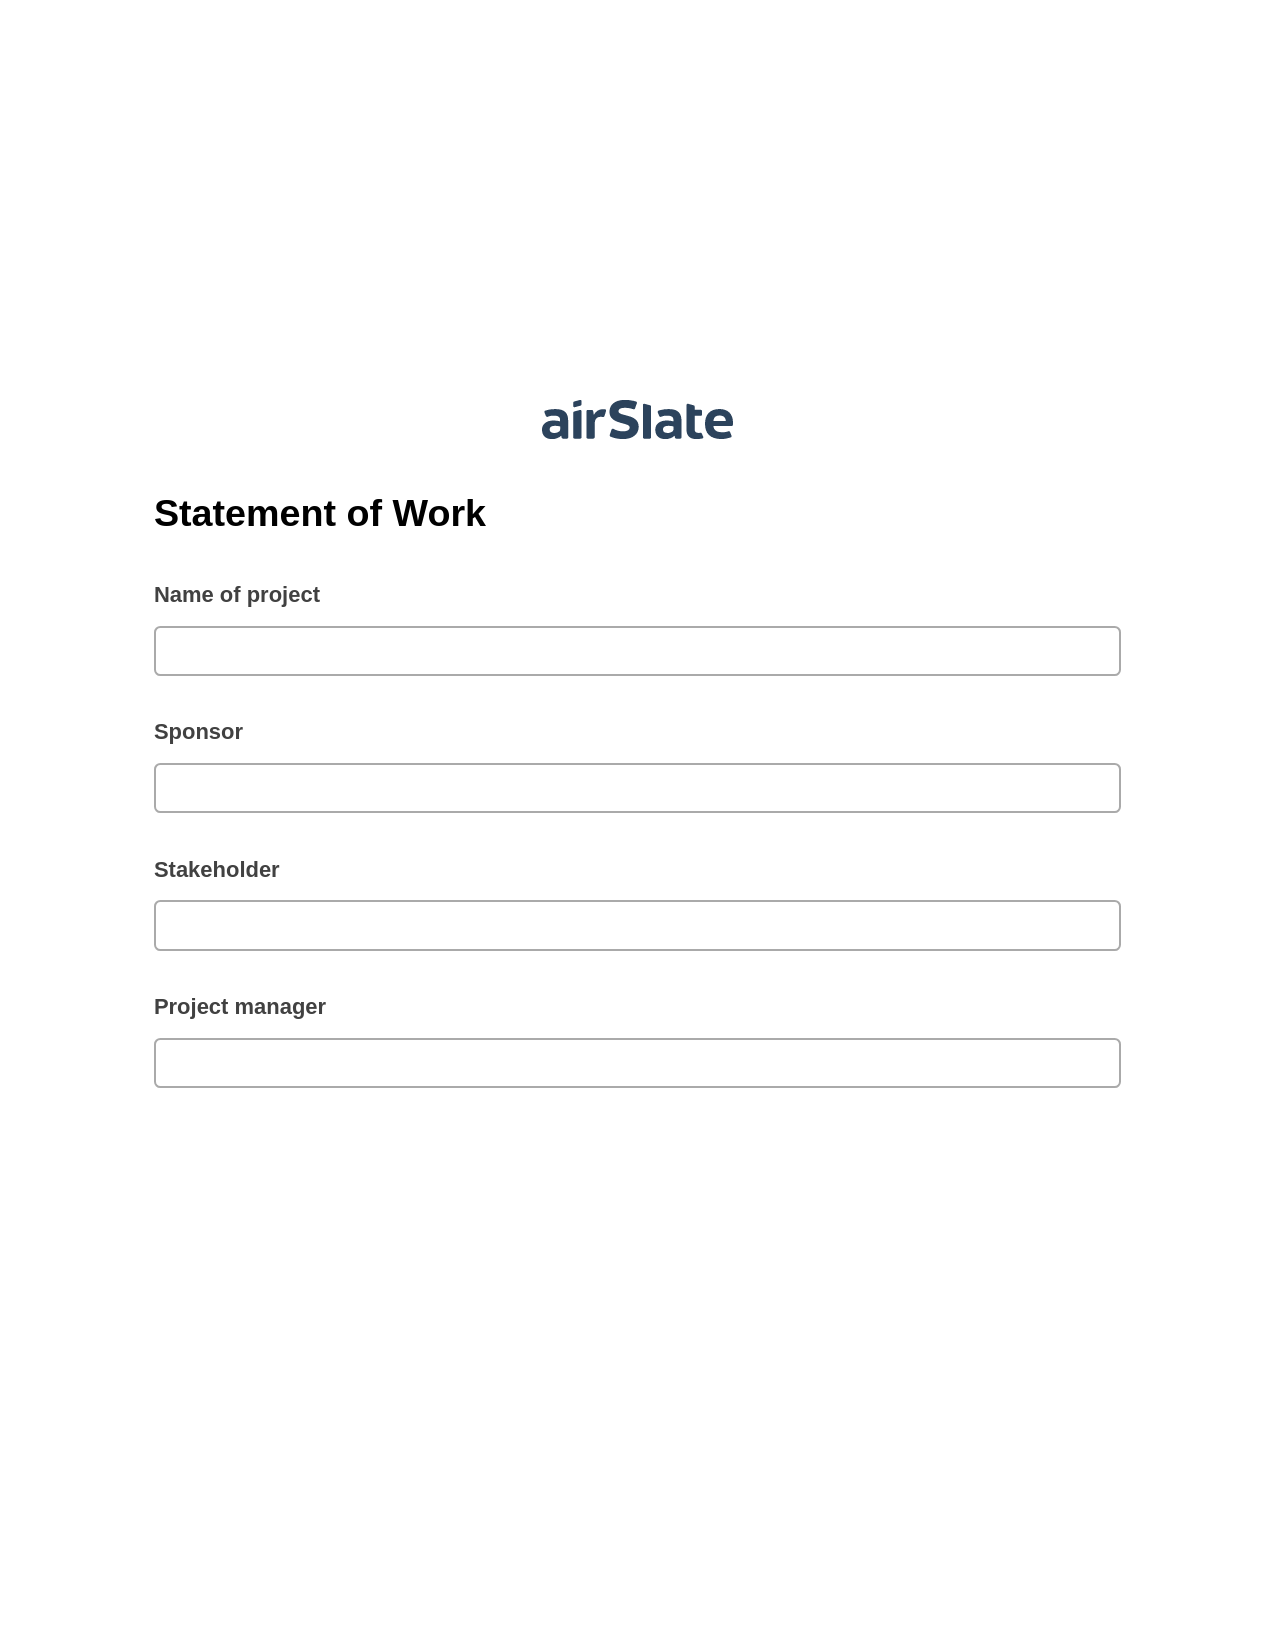 Statement of Work Pre-fill Dropdown from Airtable, Audit Trail Bot, Box Bot